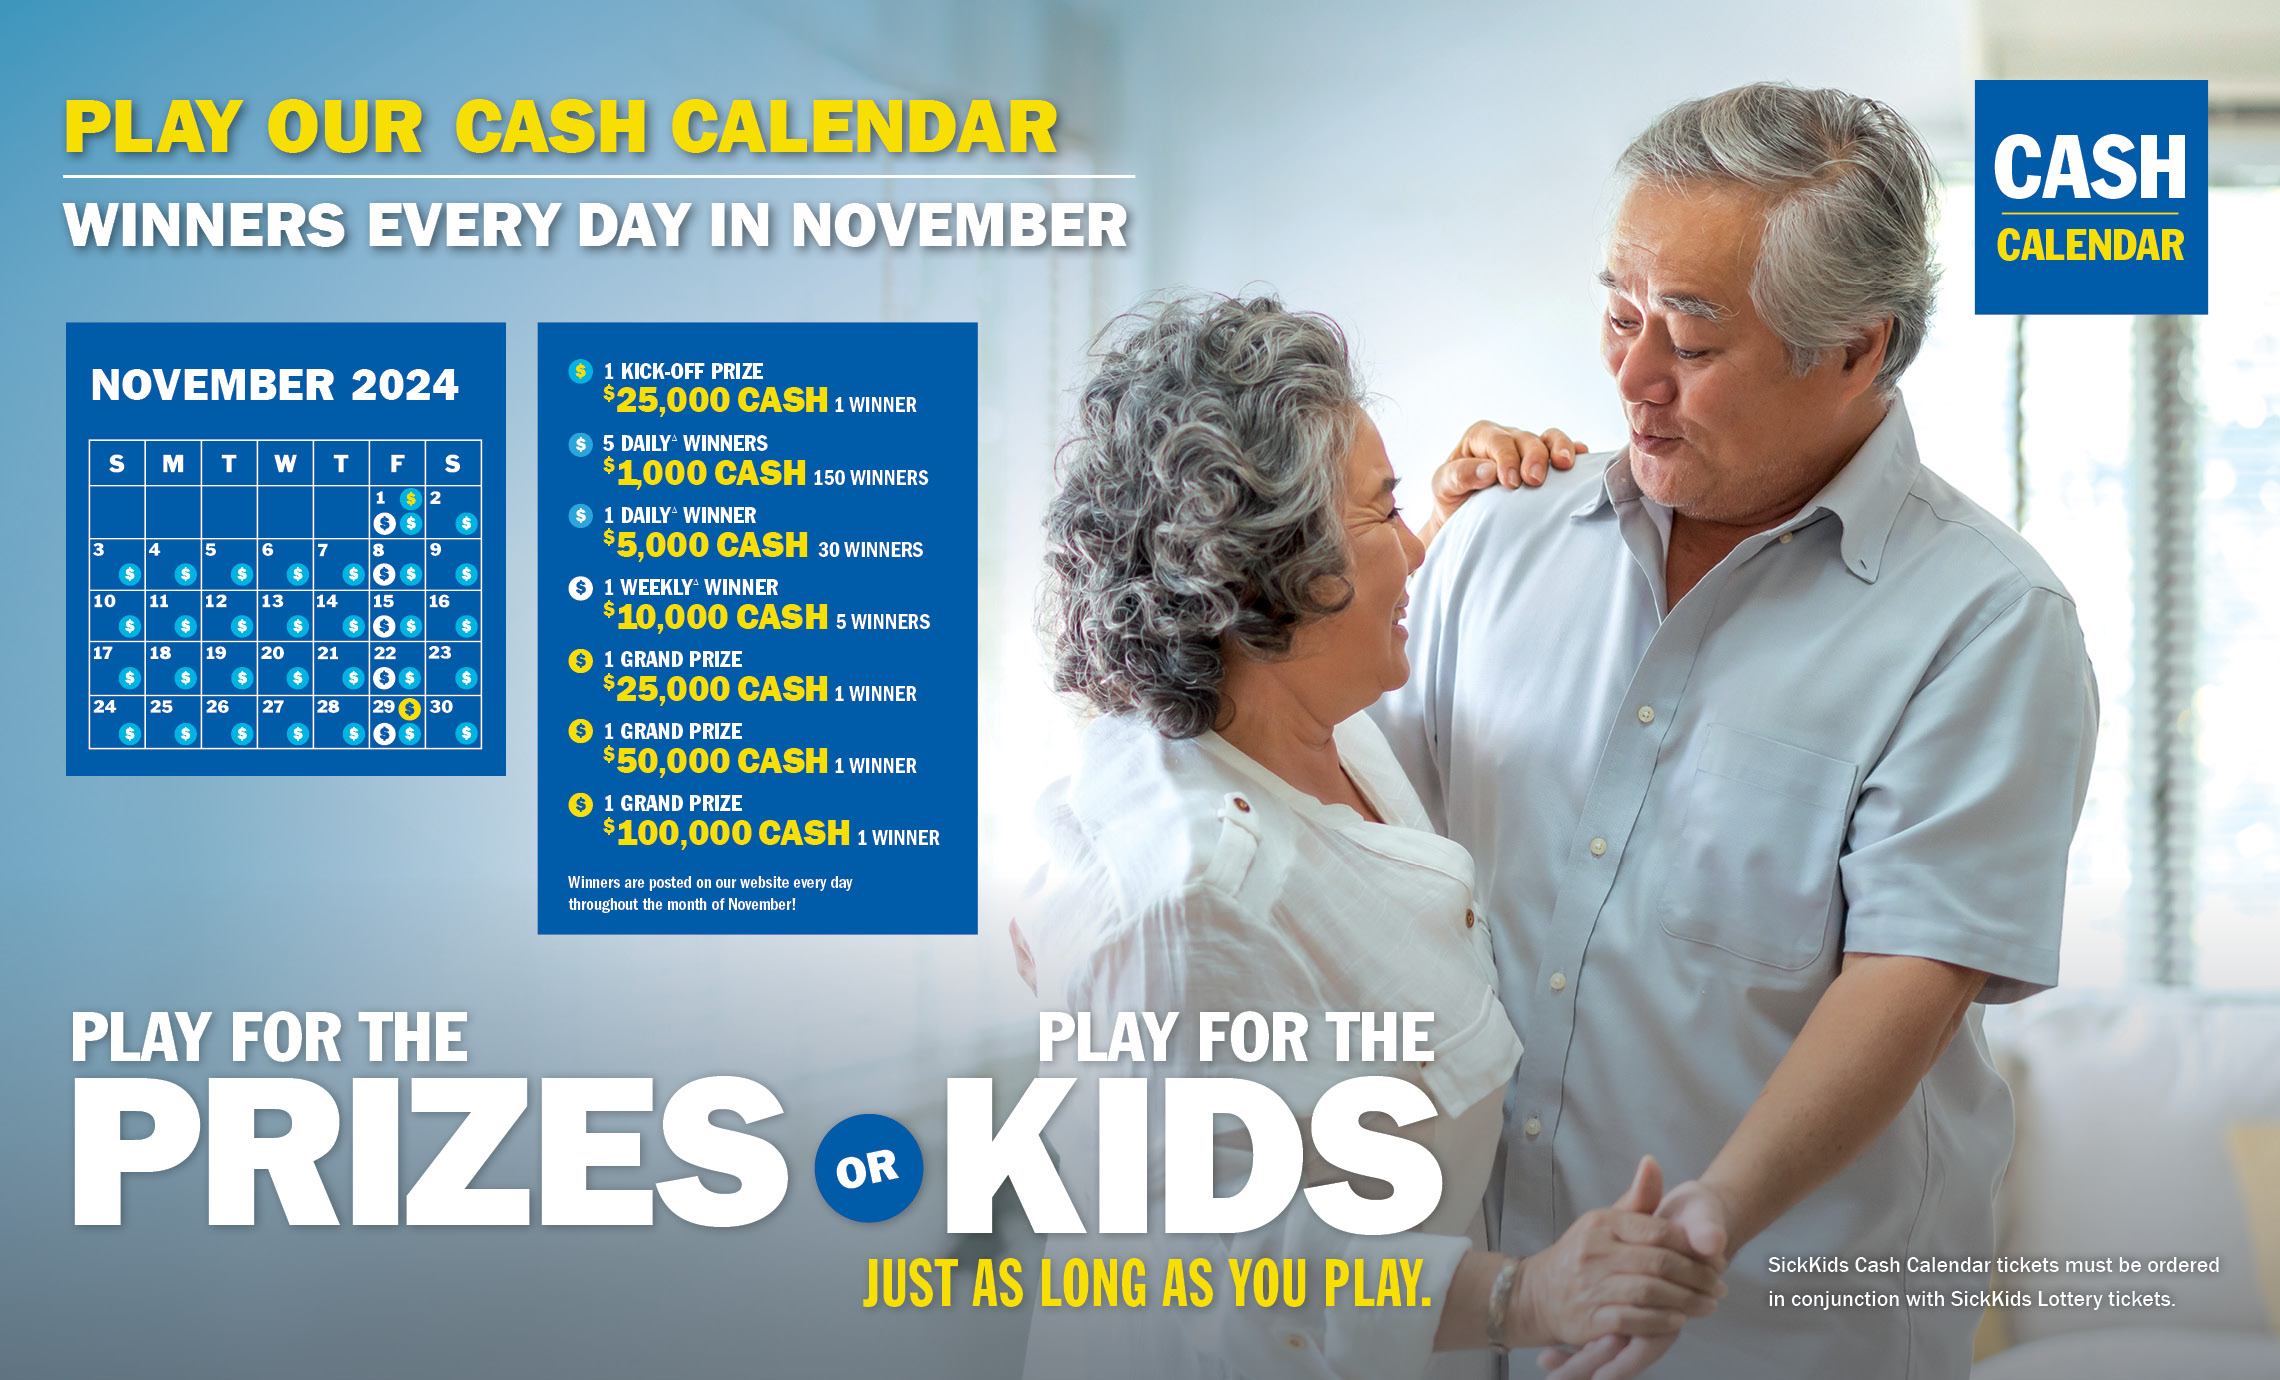 PLAY OUR CASH CALENDAR - WINNERS EVERY DAY IN OCTOBER!